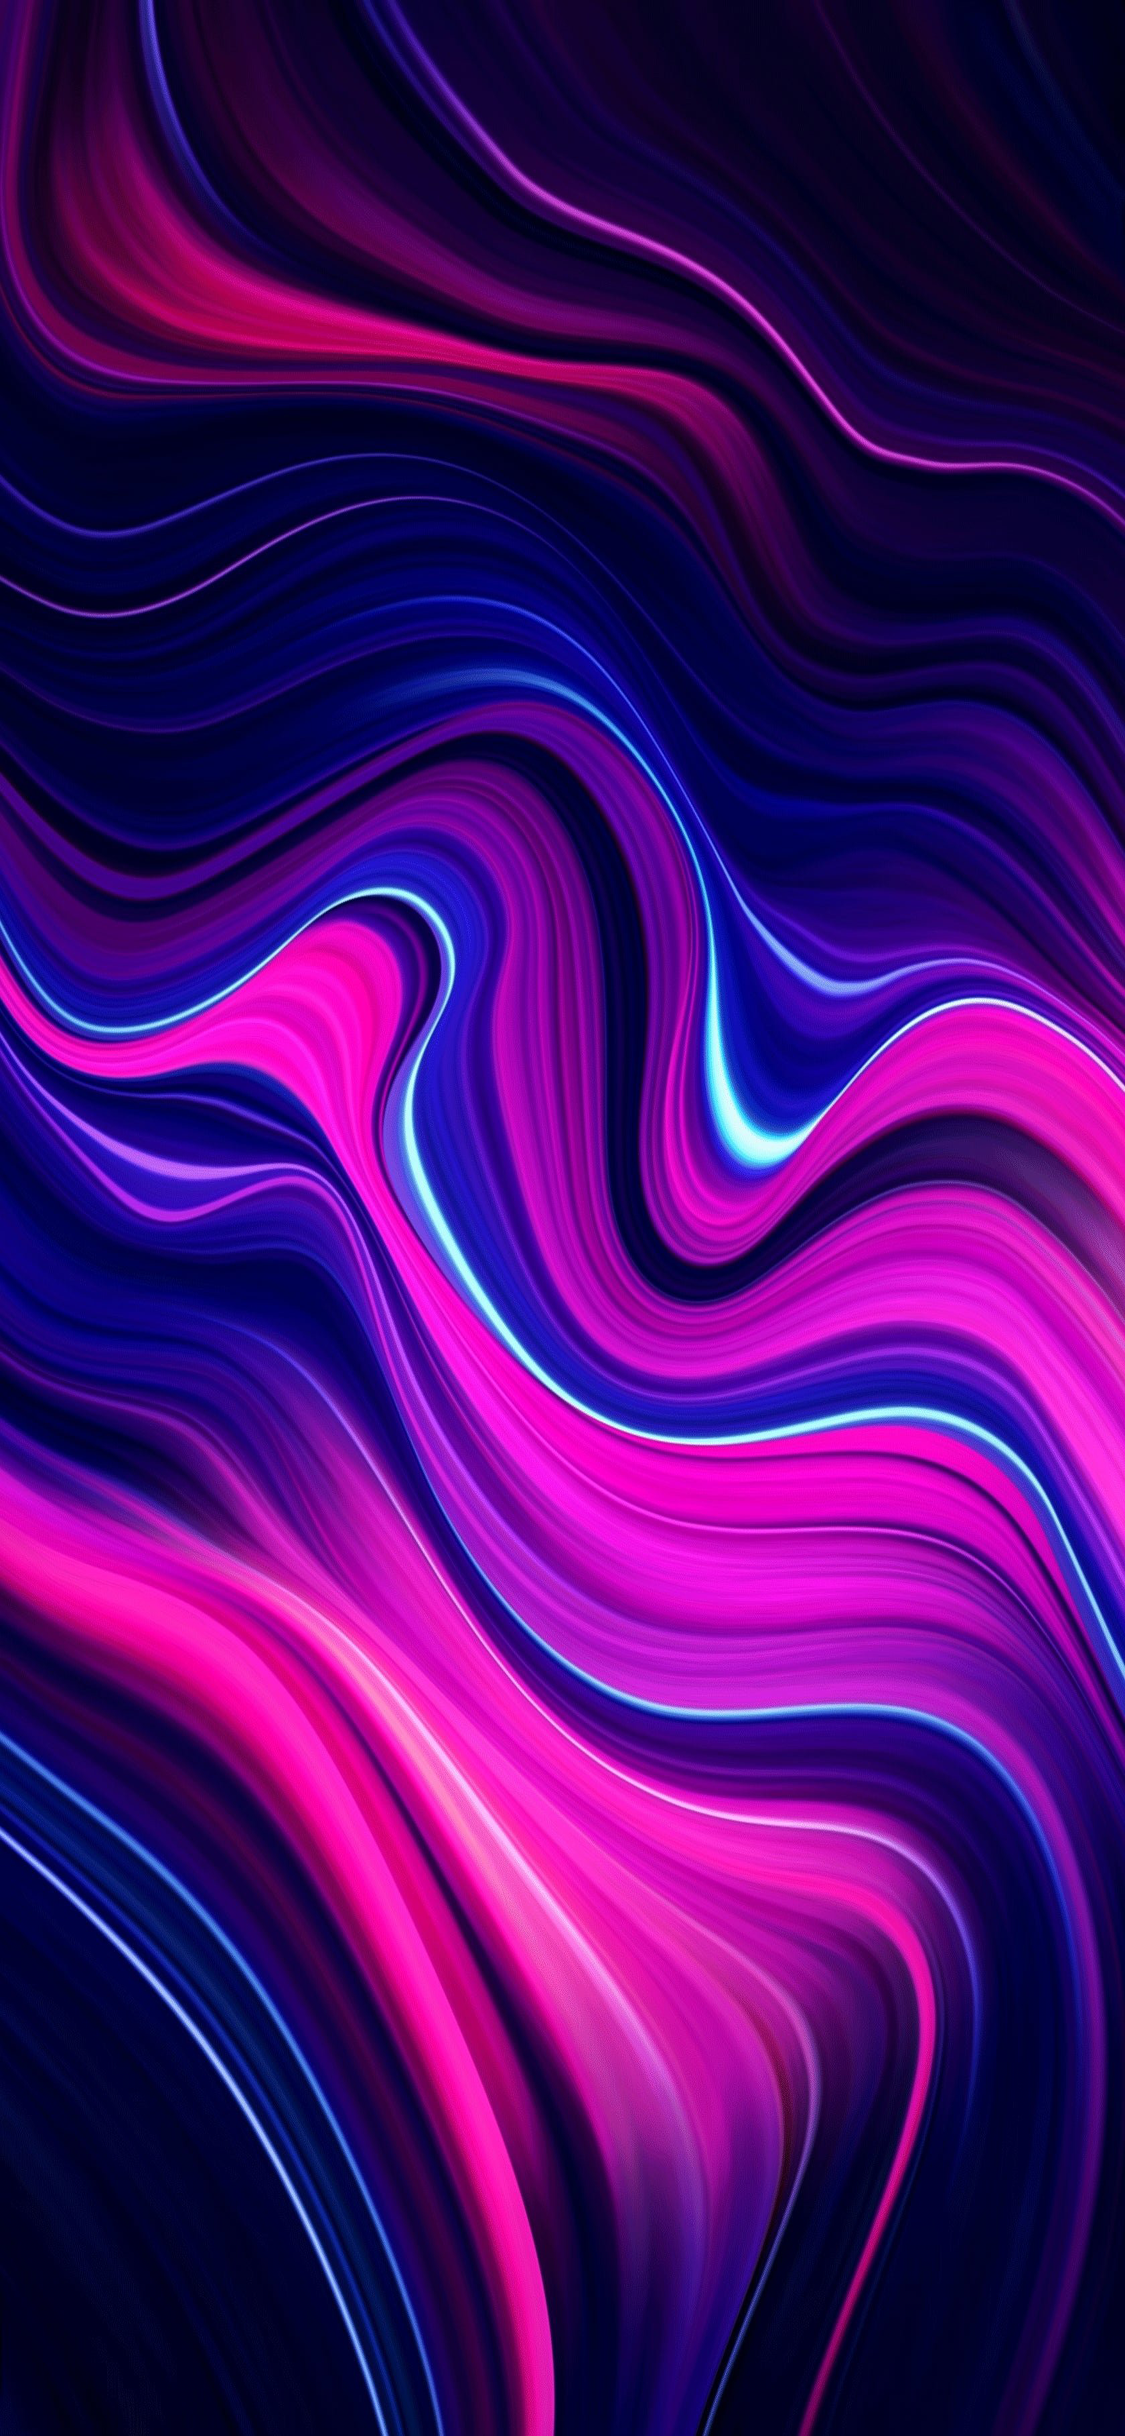 Wallpaper For iPhone 11 Purple ` Wallpaper For iPhone. Abstract wallpaper, Purple wallpaper, Vaporwave wallpaper